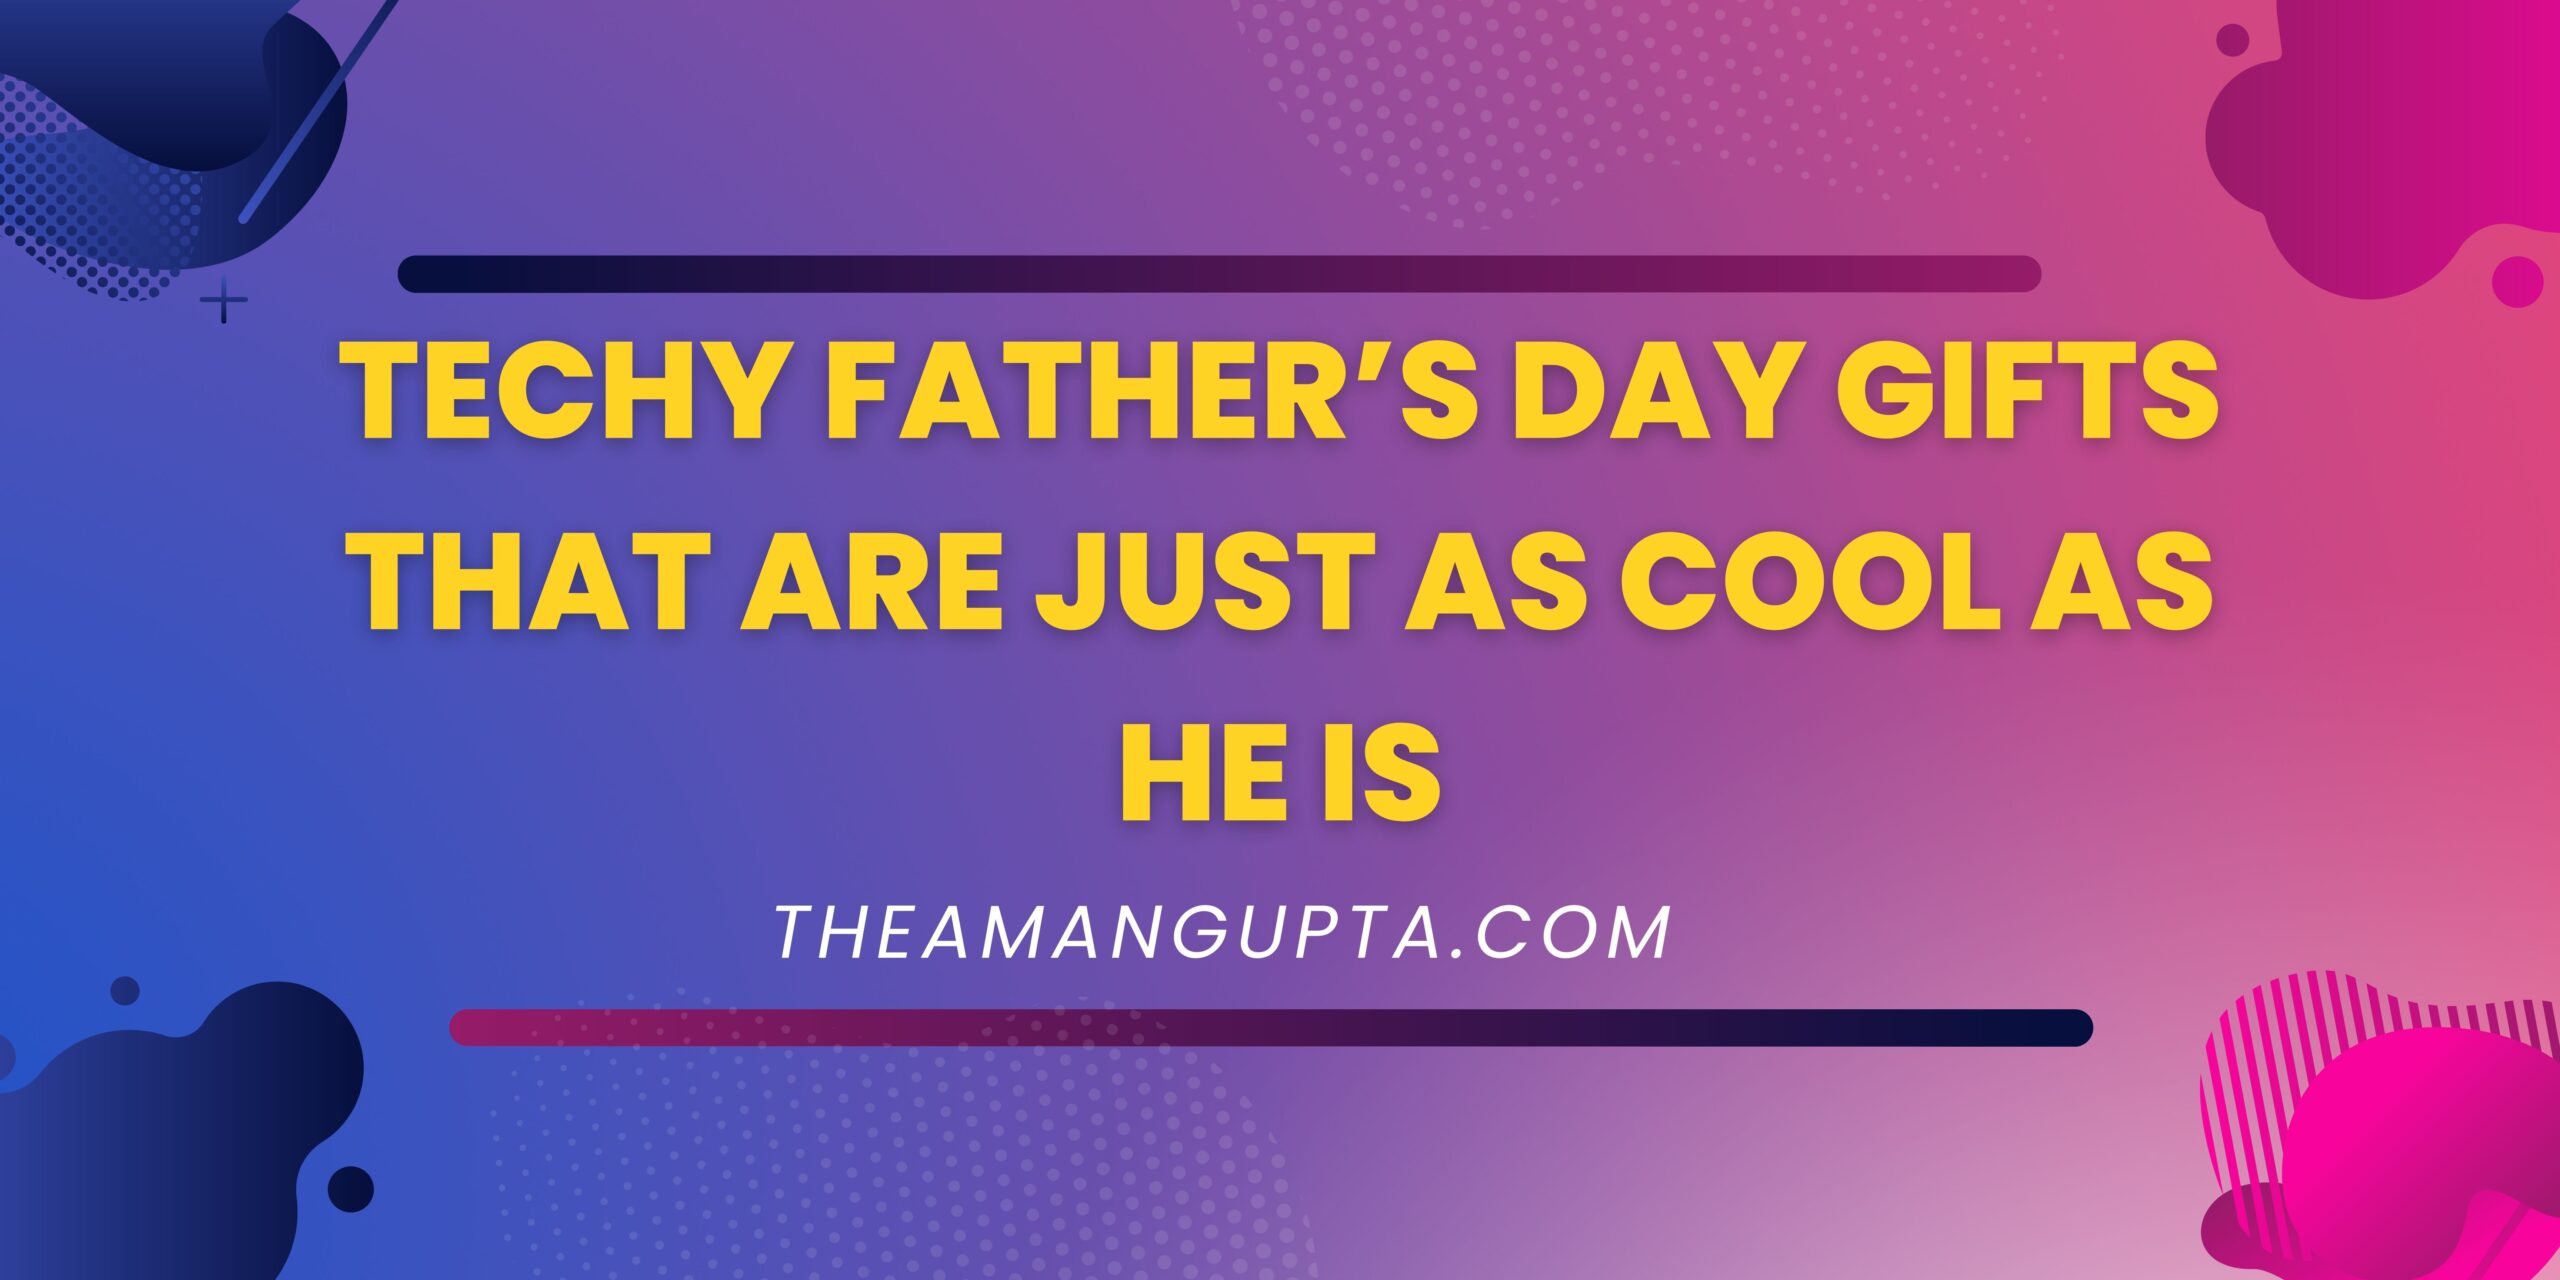 Techy Father’s Day Gifts That Are Just As Cool As He Is|Father's Day|Theamangupta|Theamangupta